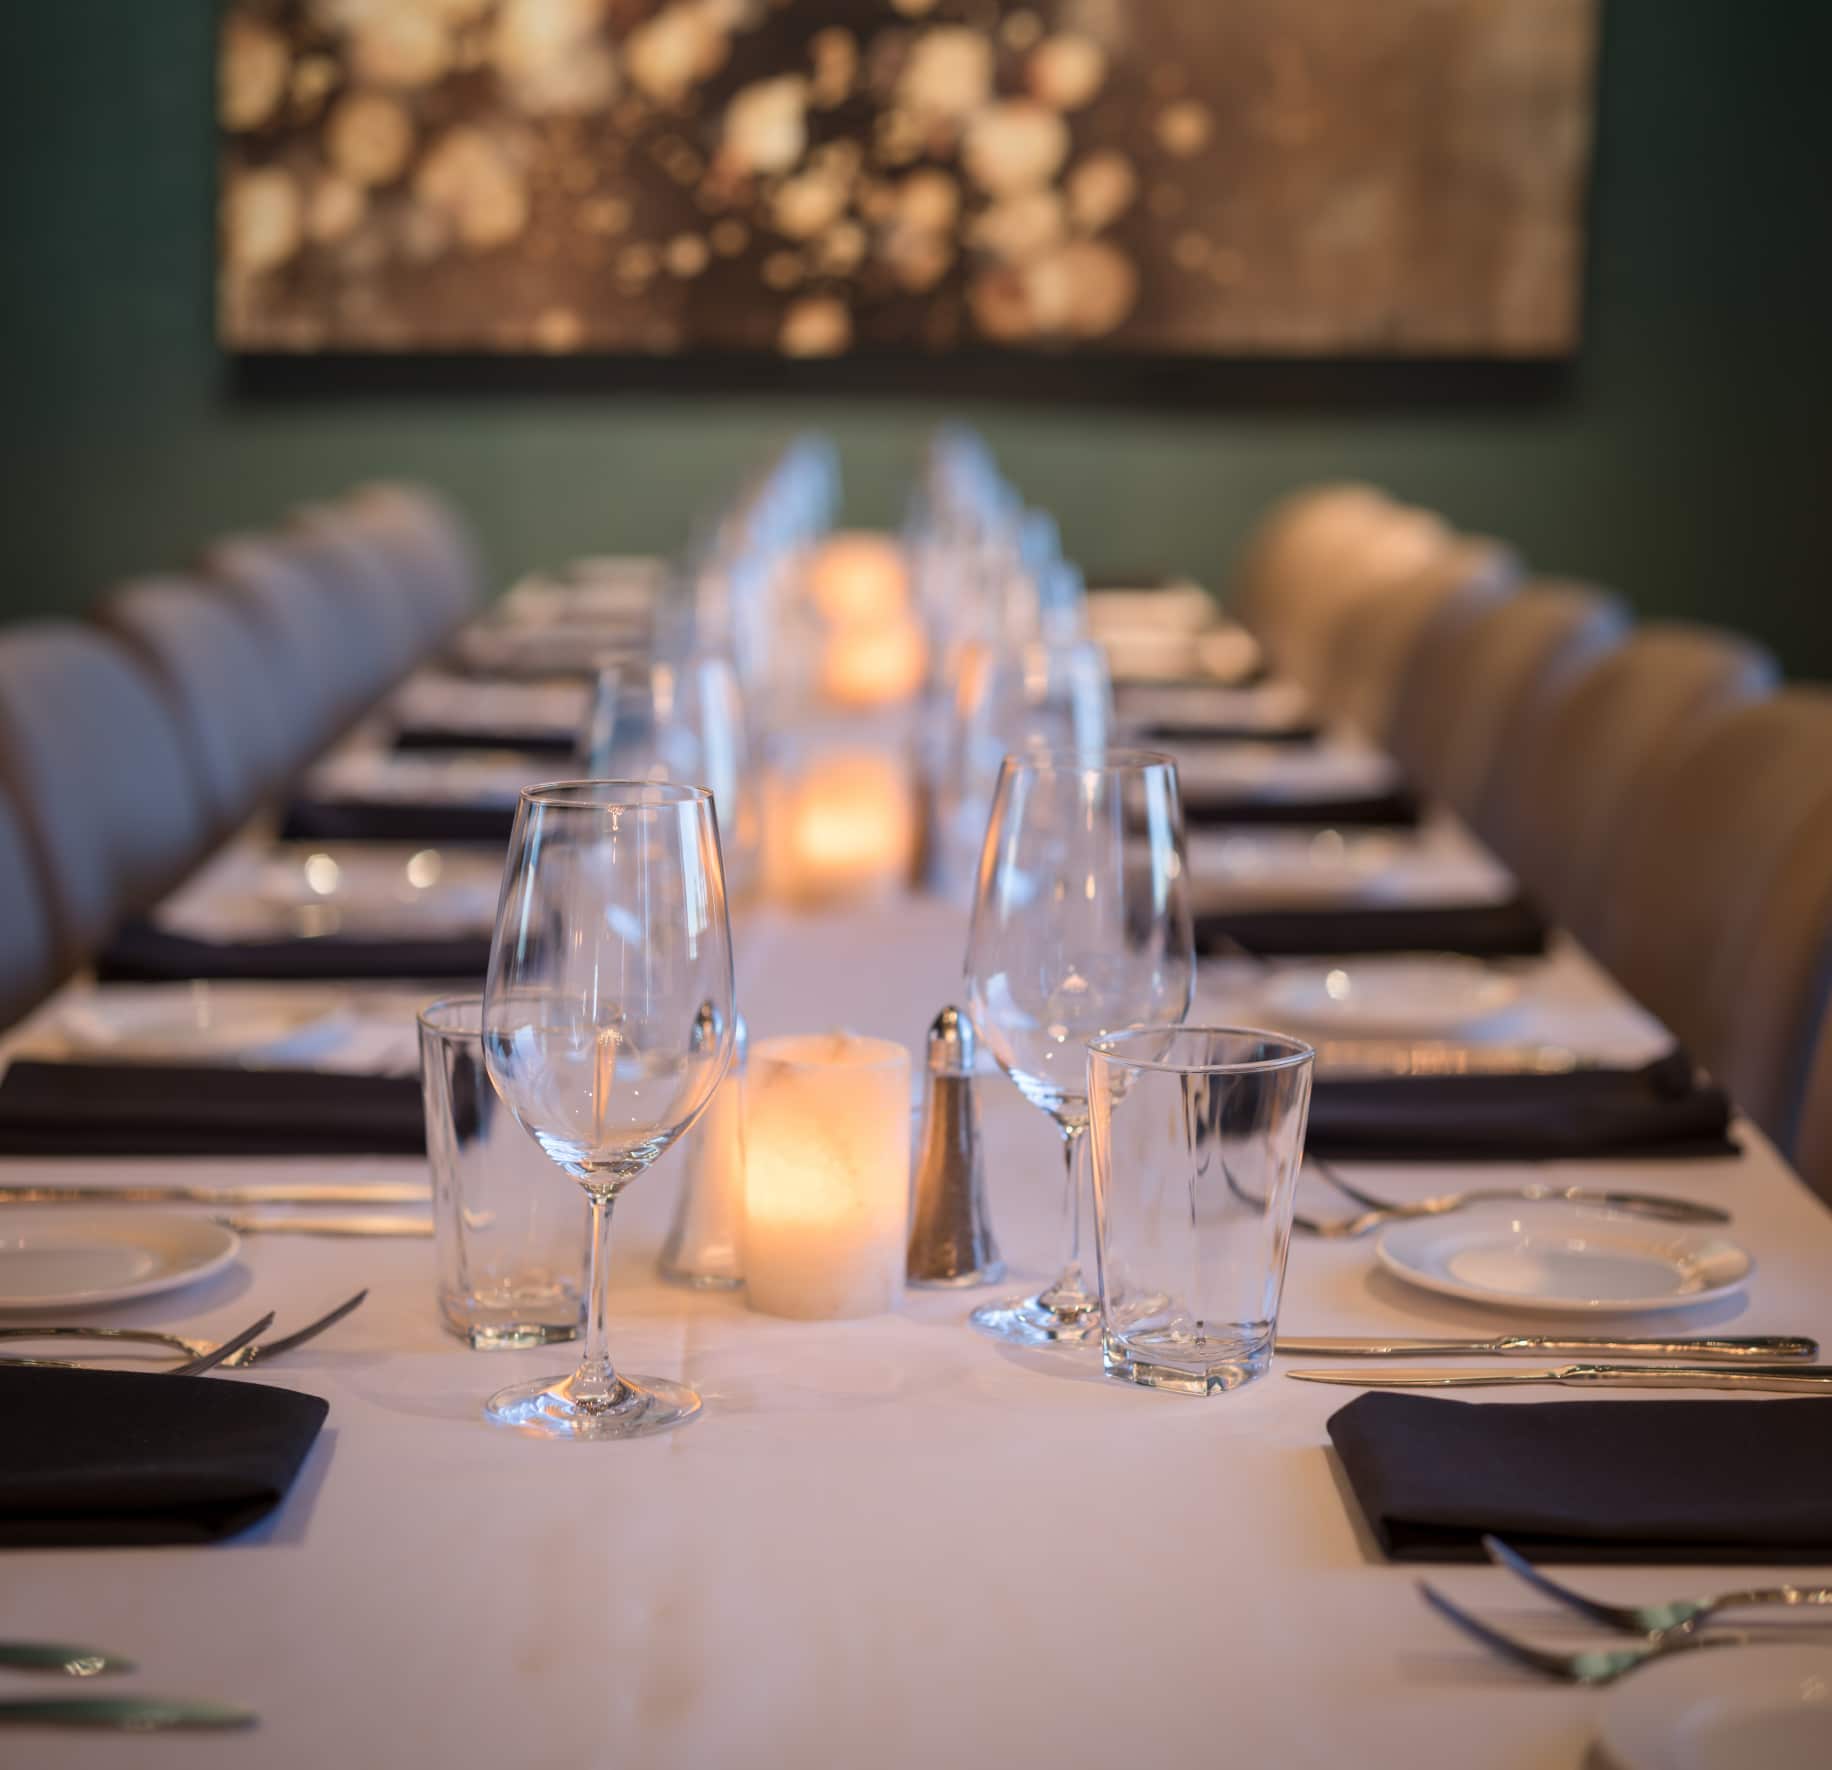 Birmingham, Alabama, Perry's Steakhouse & Grille, private dining